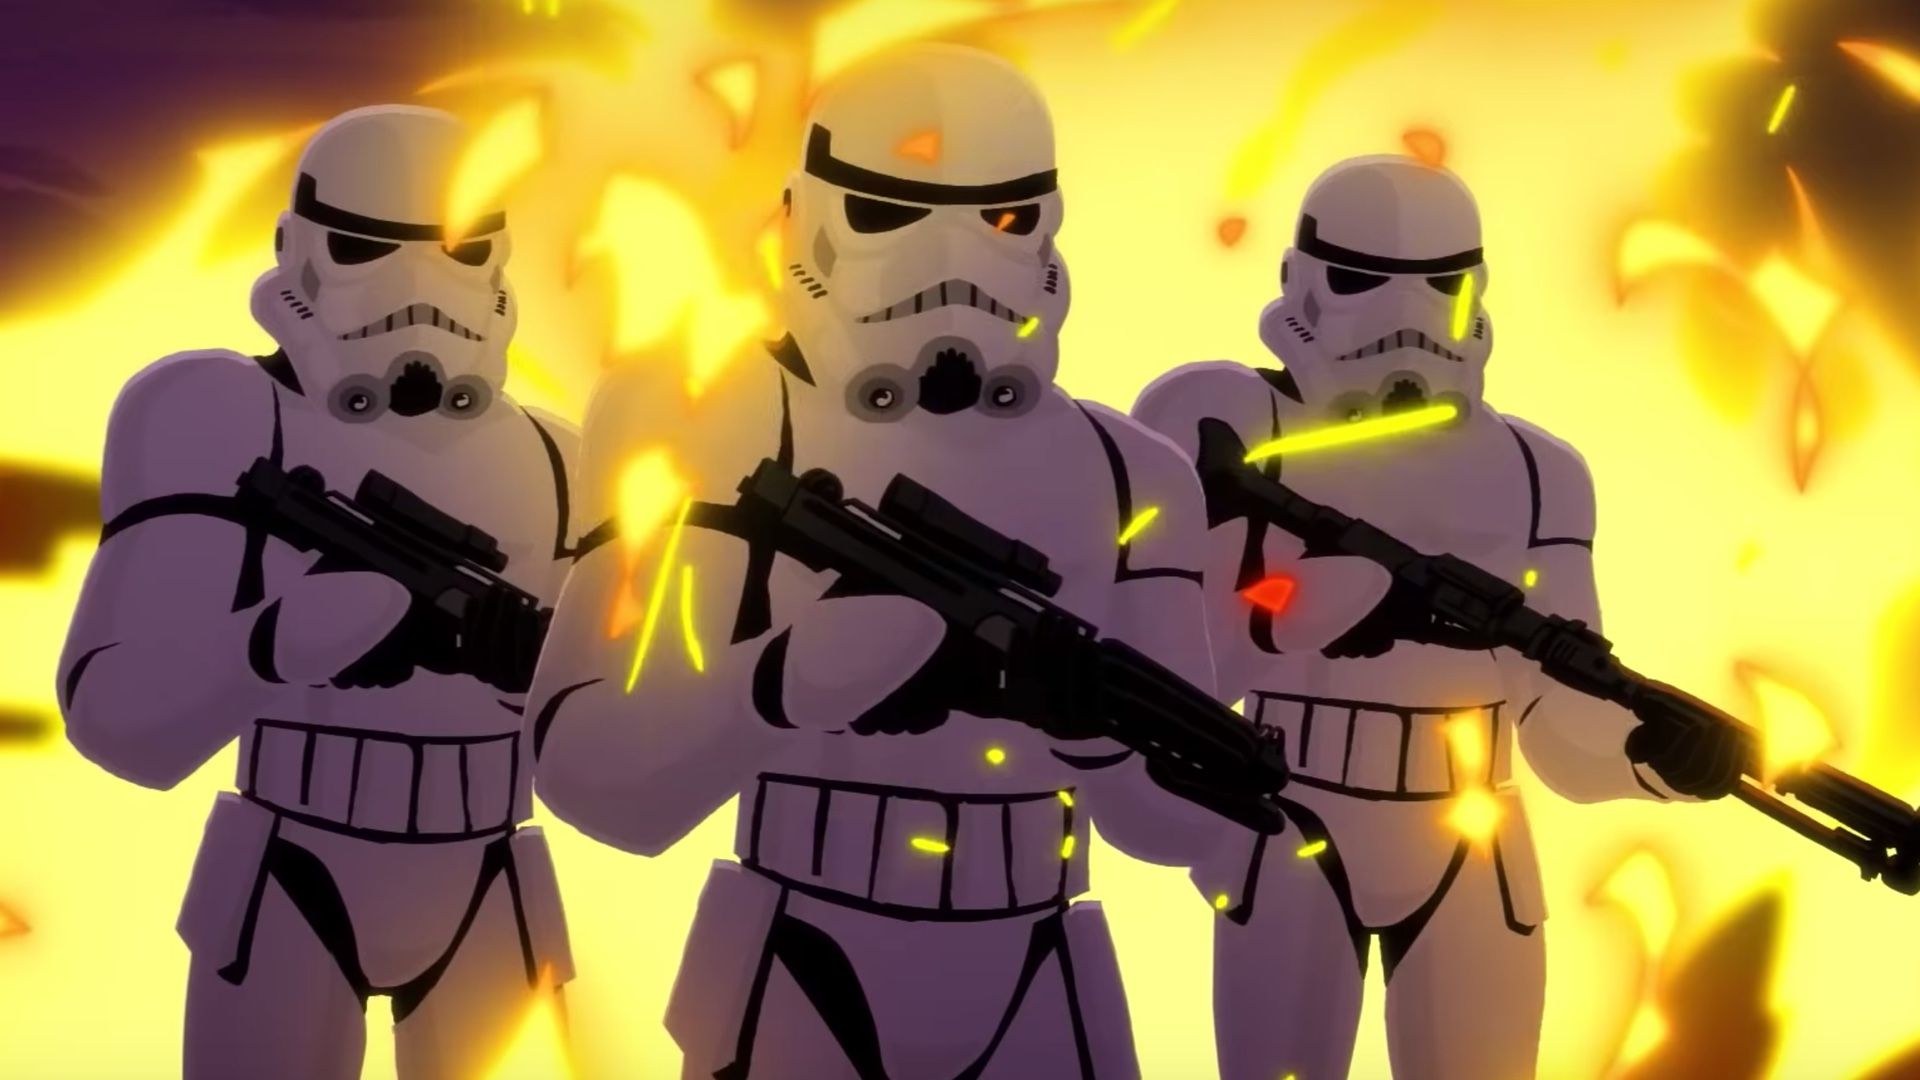 Cool Animated STAR WARS Stormtrooper Propaganda Video of the Galactic Empire